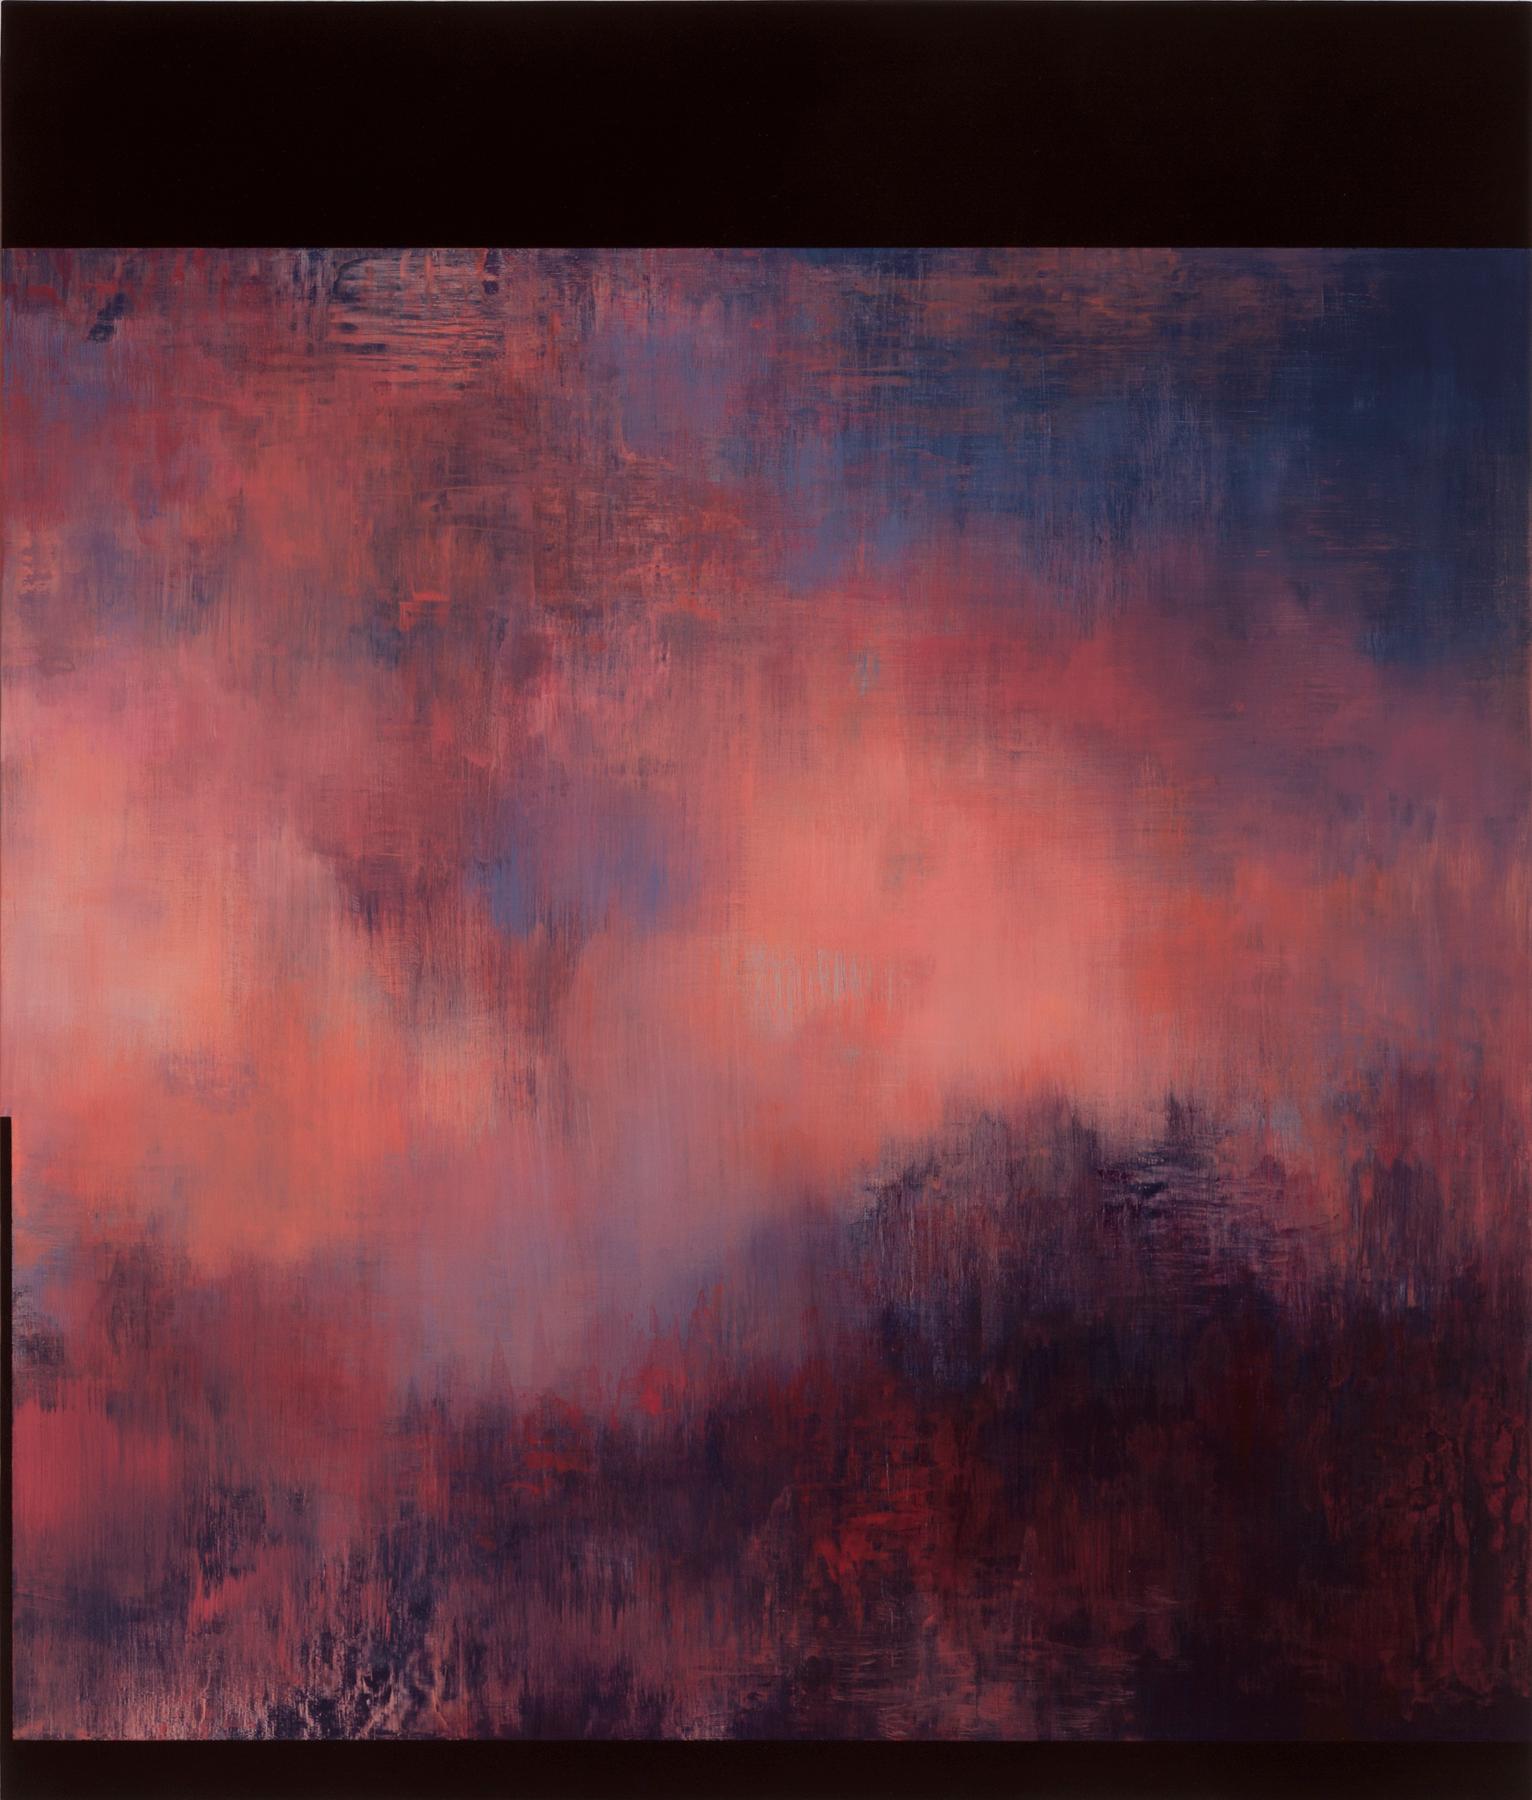 Tamar Zinn
Behind Closed Eyes 19, 2019
oil on wood panel
33 x 28 in.
(zinn1024)

This colorful abstract oil painting on panel features layered, painterly swathes of red and blue that blend together to create subtle color shifts and an atmospheric